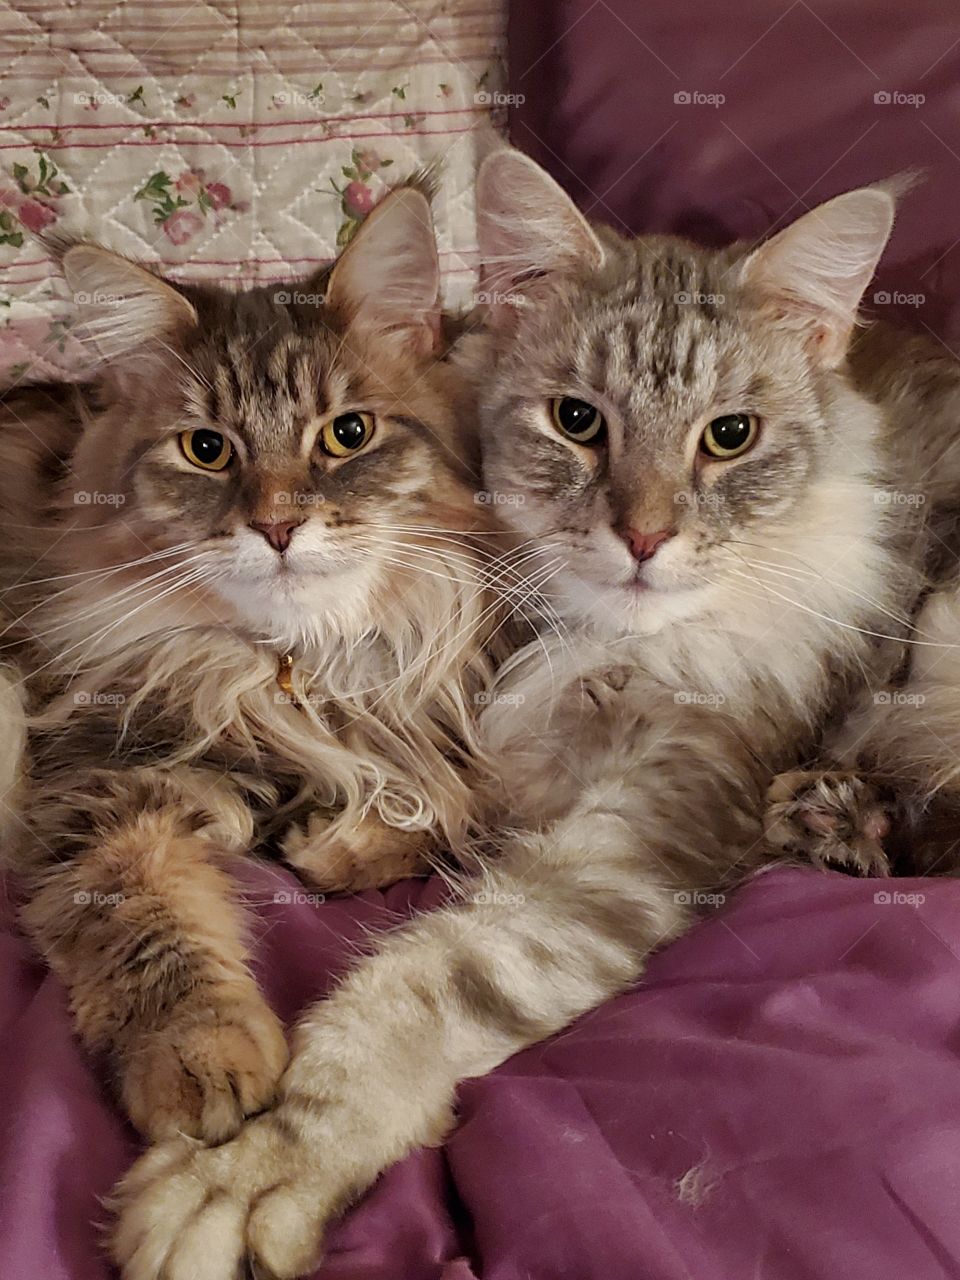 cats, Maine Coons,cat love, cat snuggle, gray cats, love cats